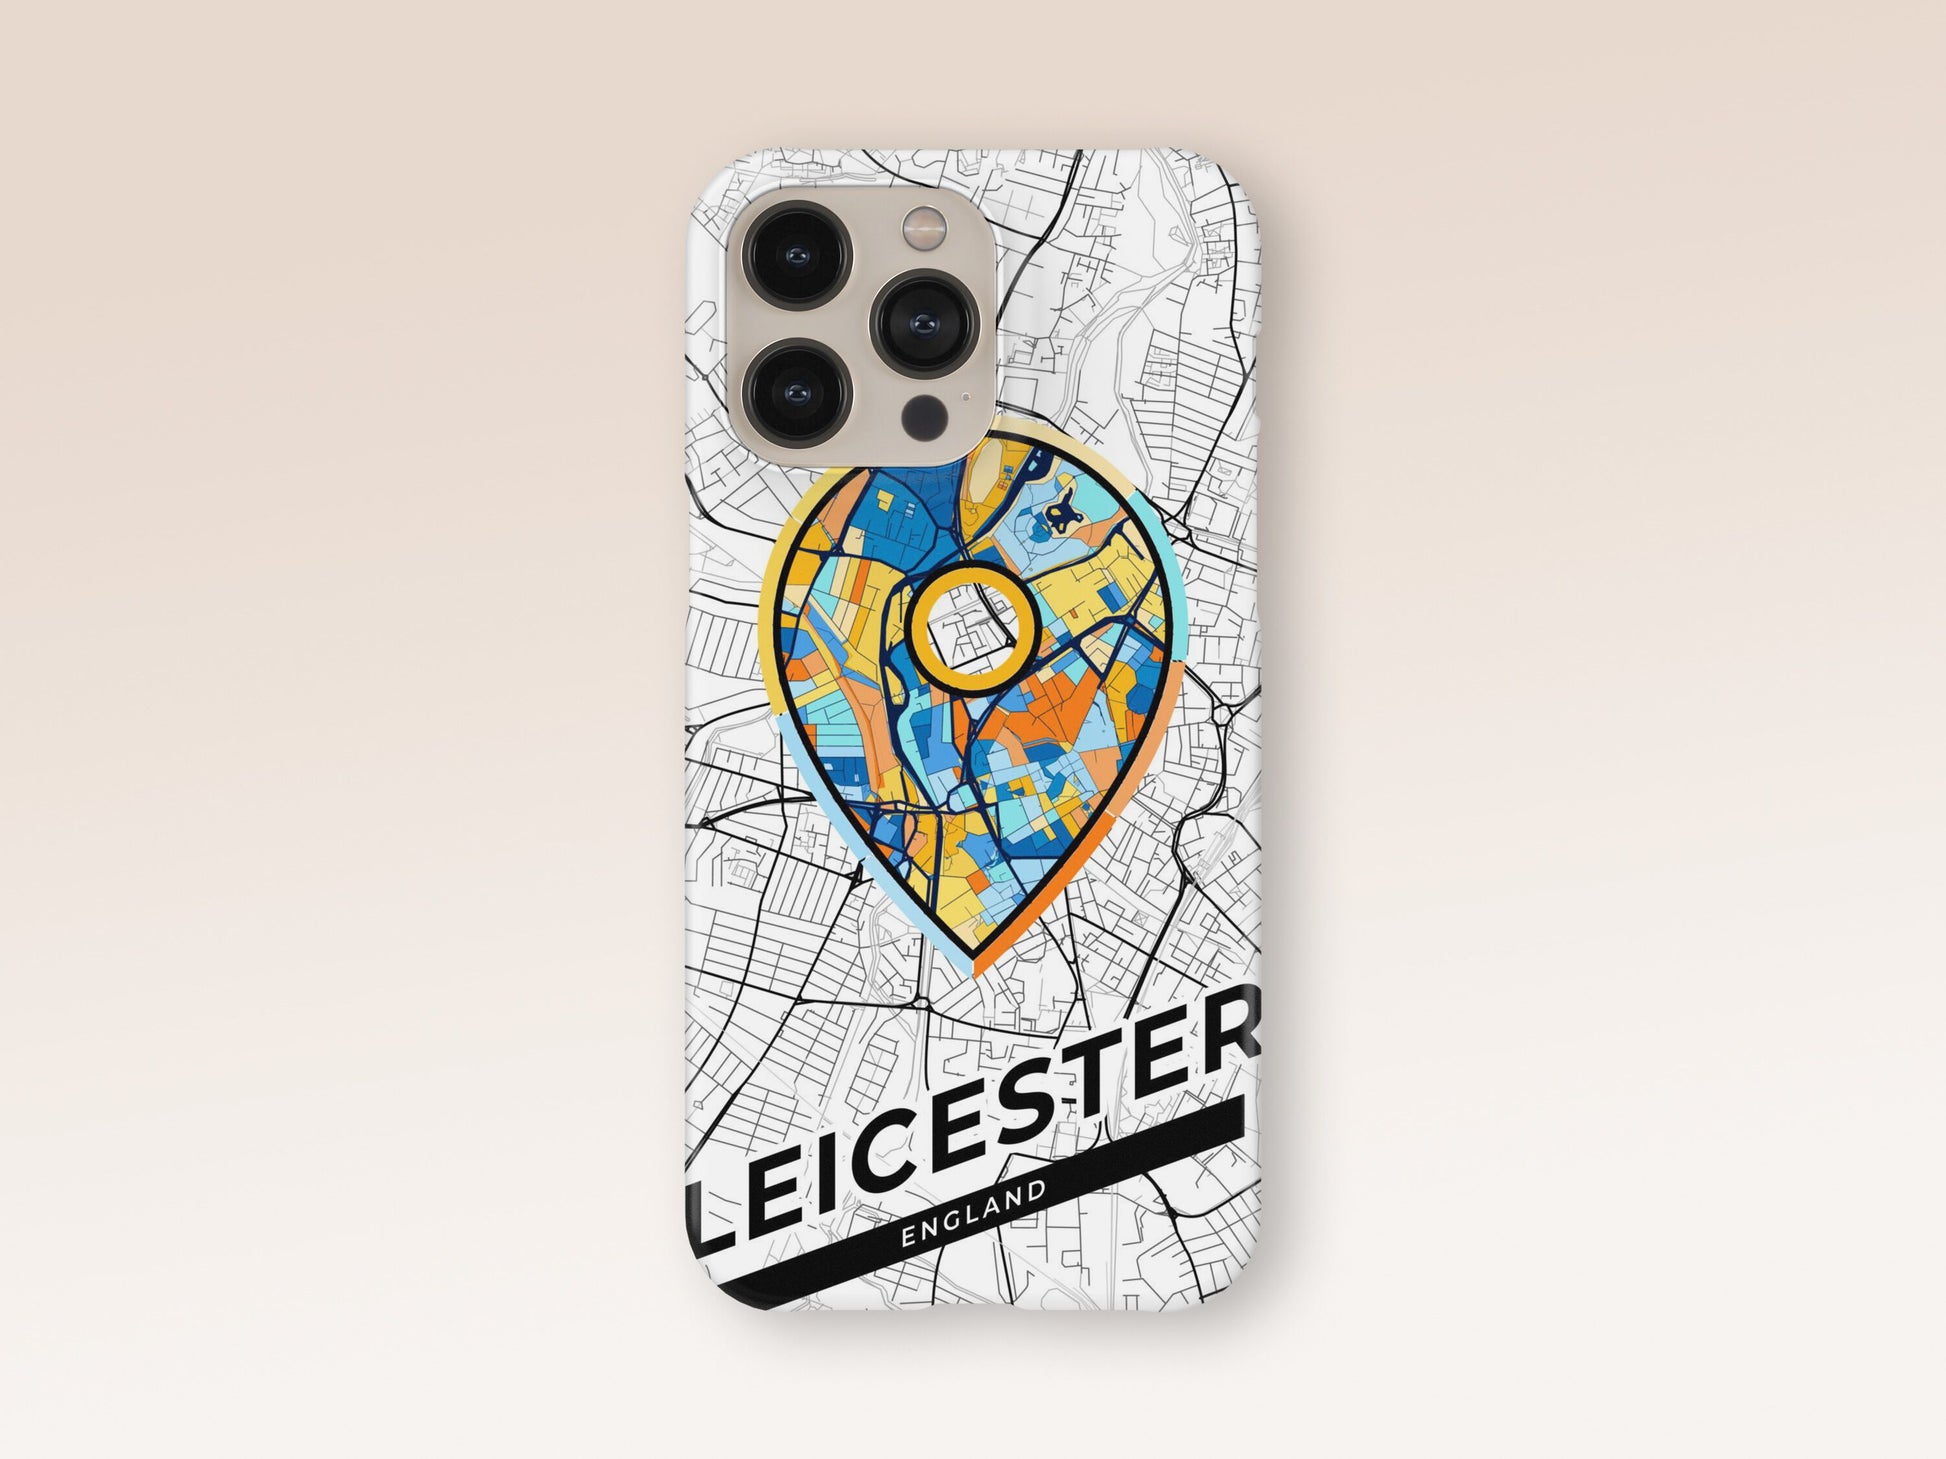 Leicester England slim phone case with colorful icon. Birthday, wedding or housewarming gift. Couple match cases. 1